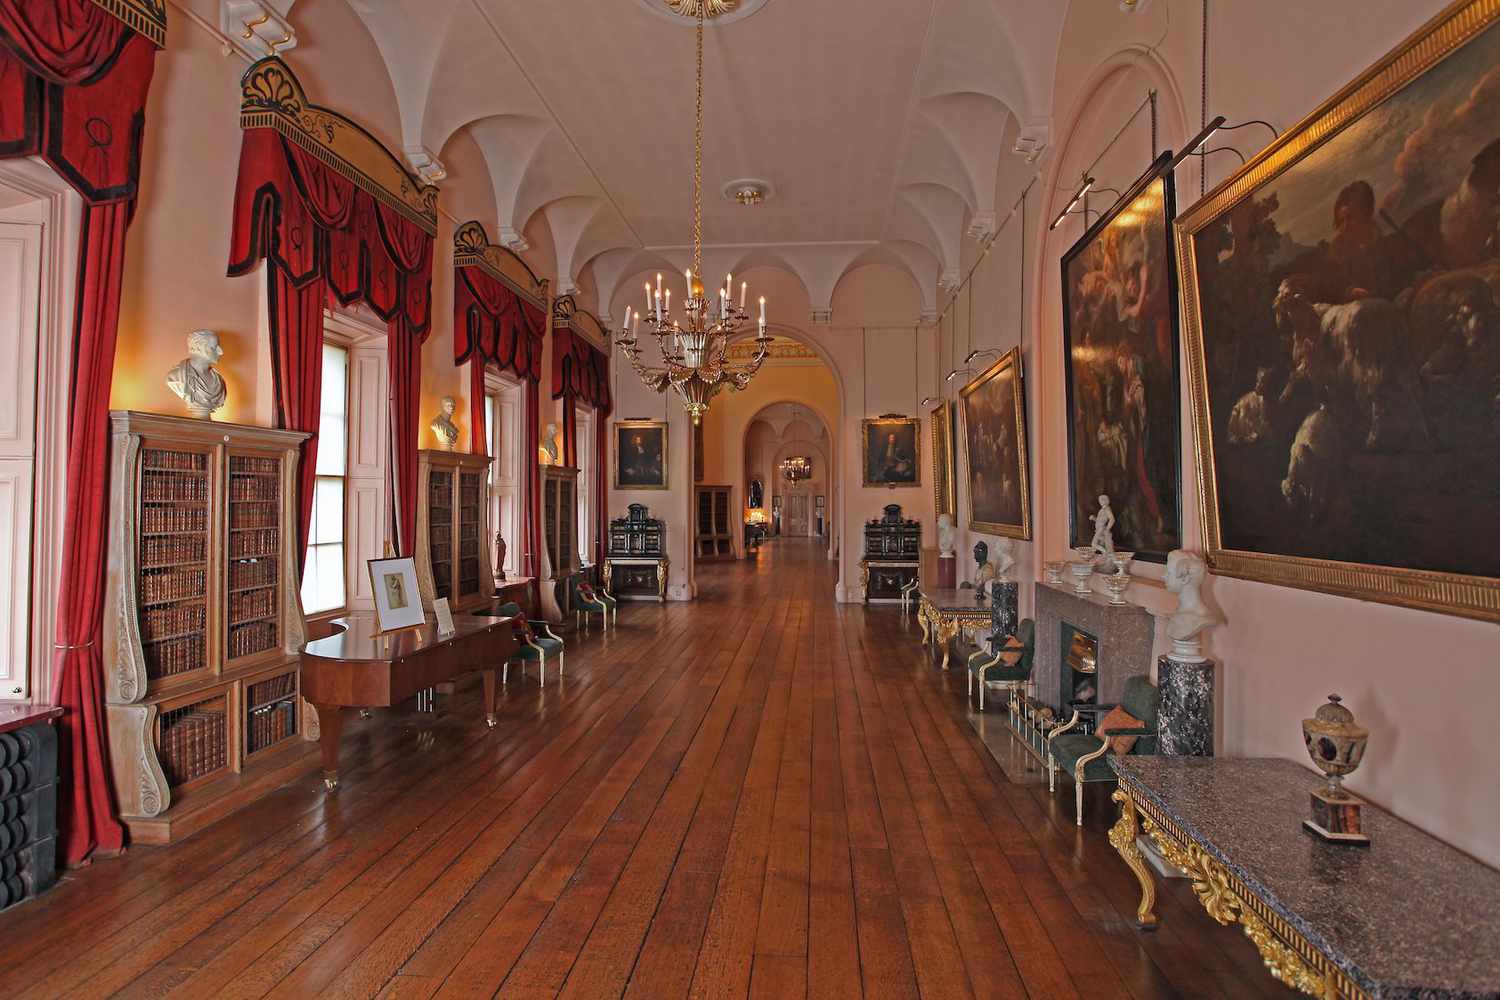 Long Gallery with many books, busts, paintings, and credenzas, and red drapes in Castle Howard